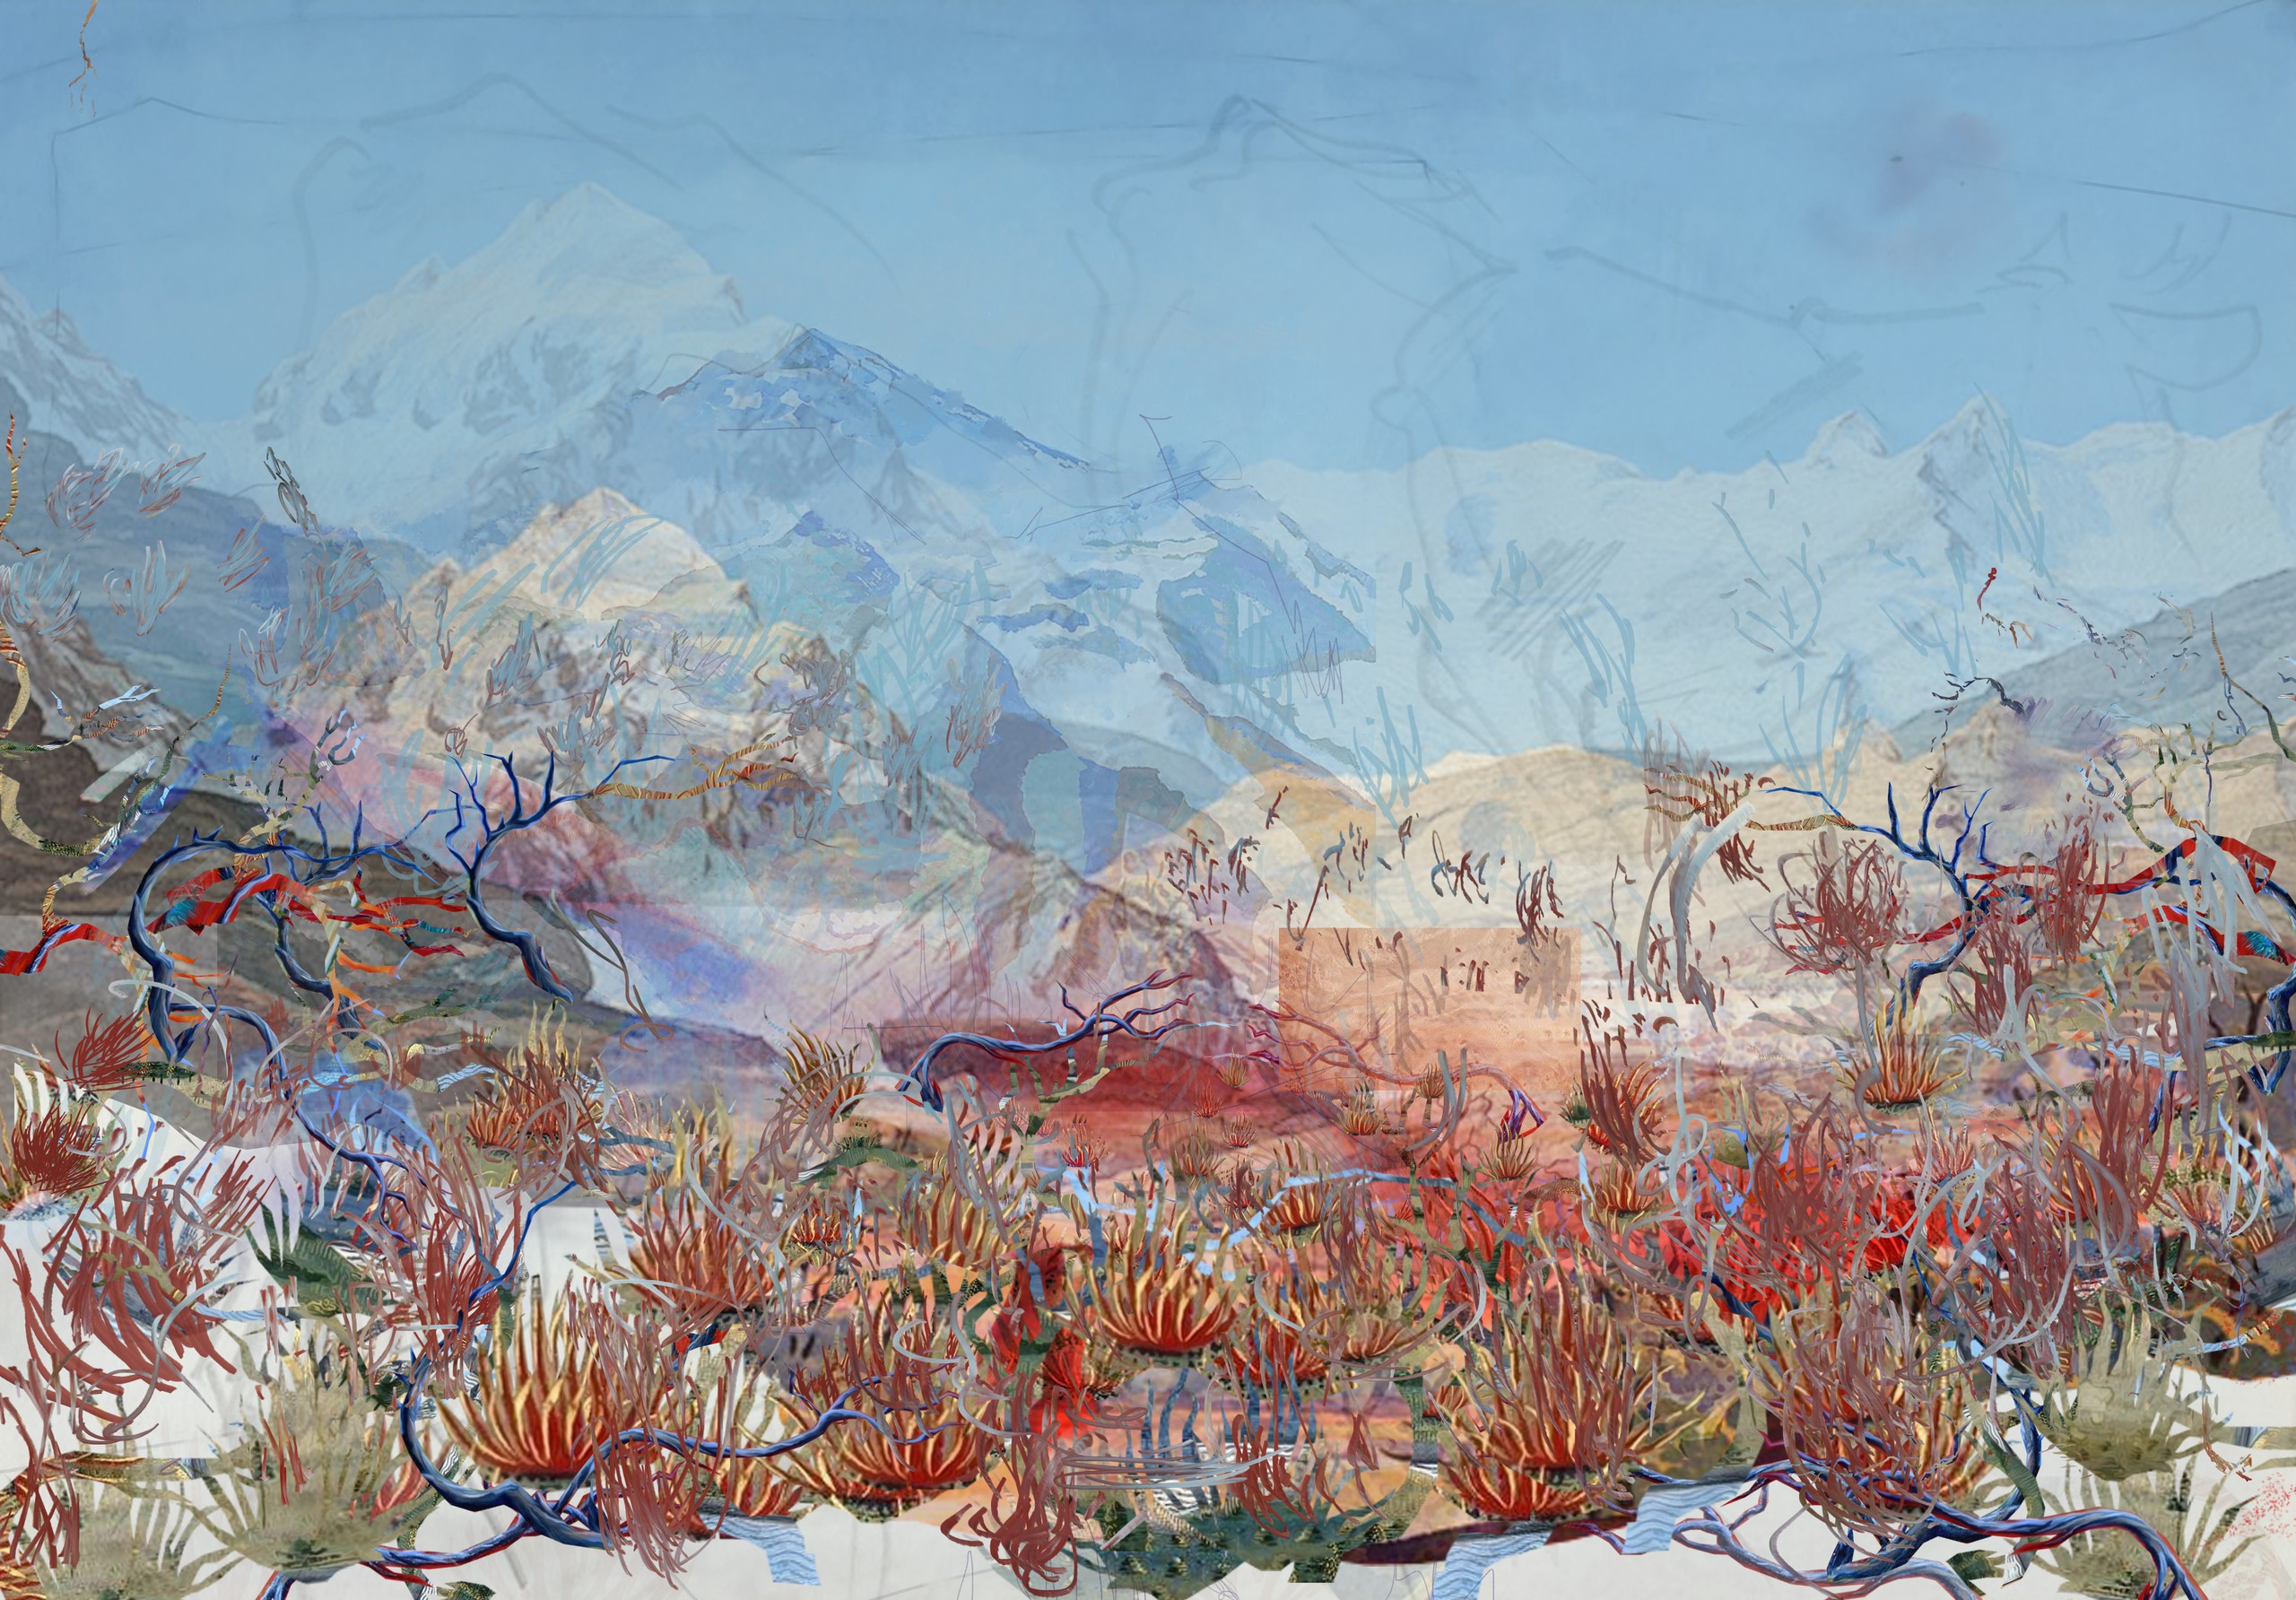 Petra Cortright, BENGAL TIGER_beurteilungsschreiben Better Homes and Gardens, 2021, Digital painting on anodized aluminum, 149.9 x 215.9 x 3 cm, 59 1/2 x 85 x 1 1/2 in